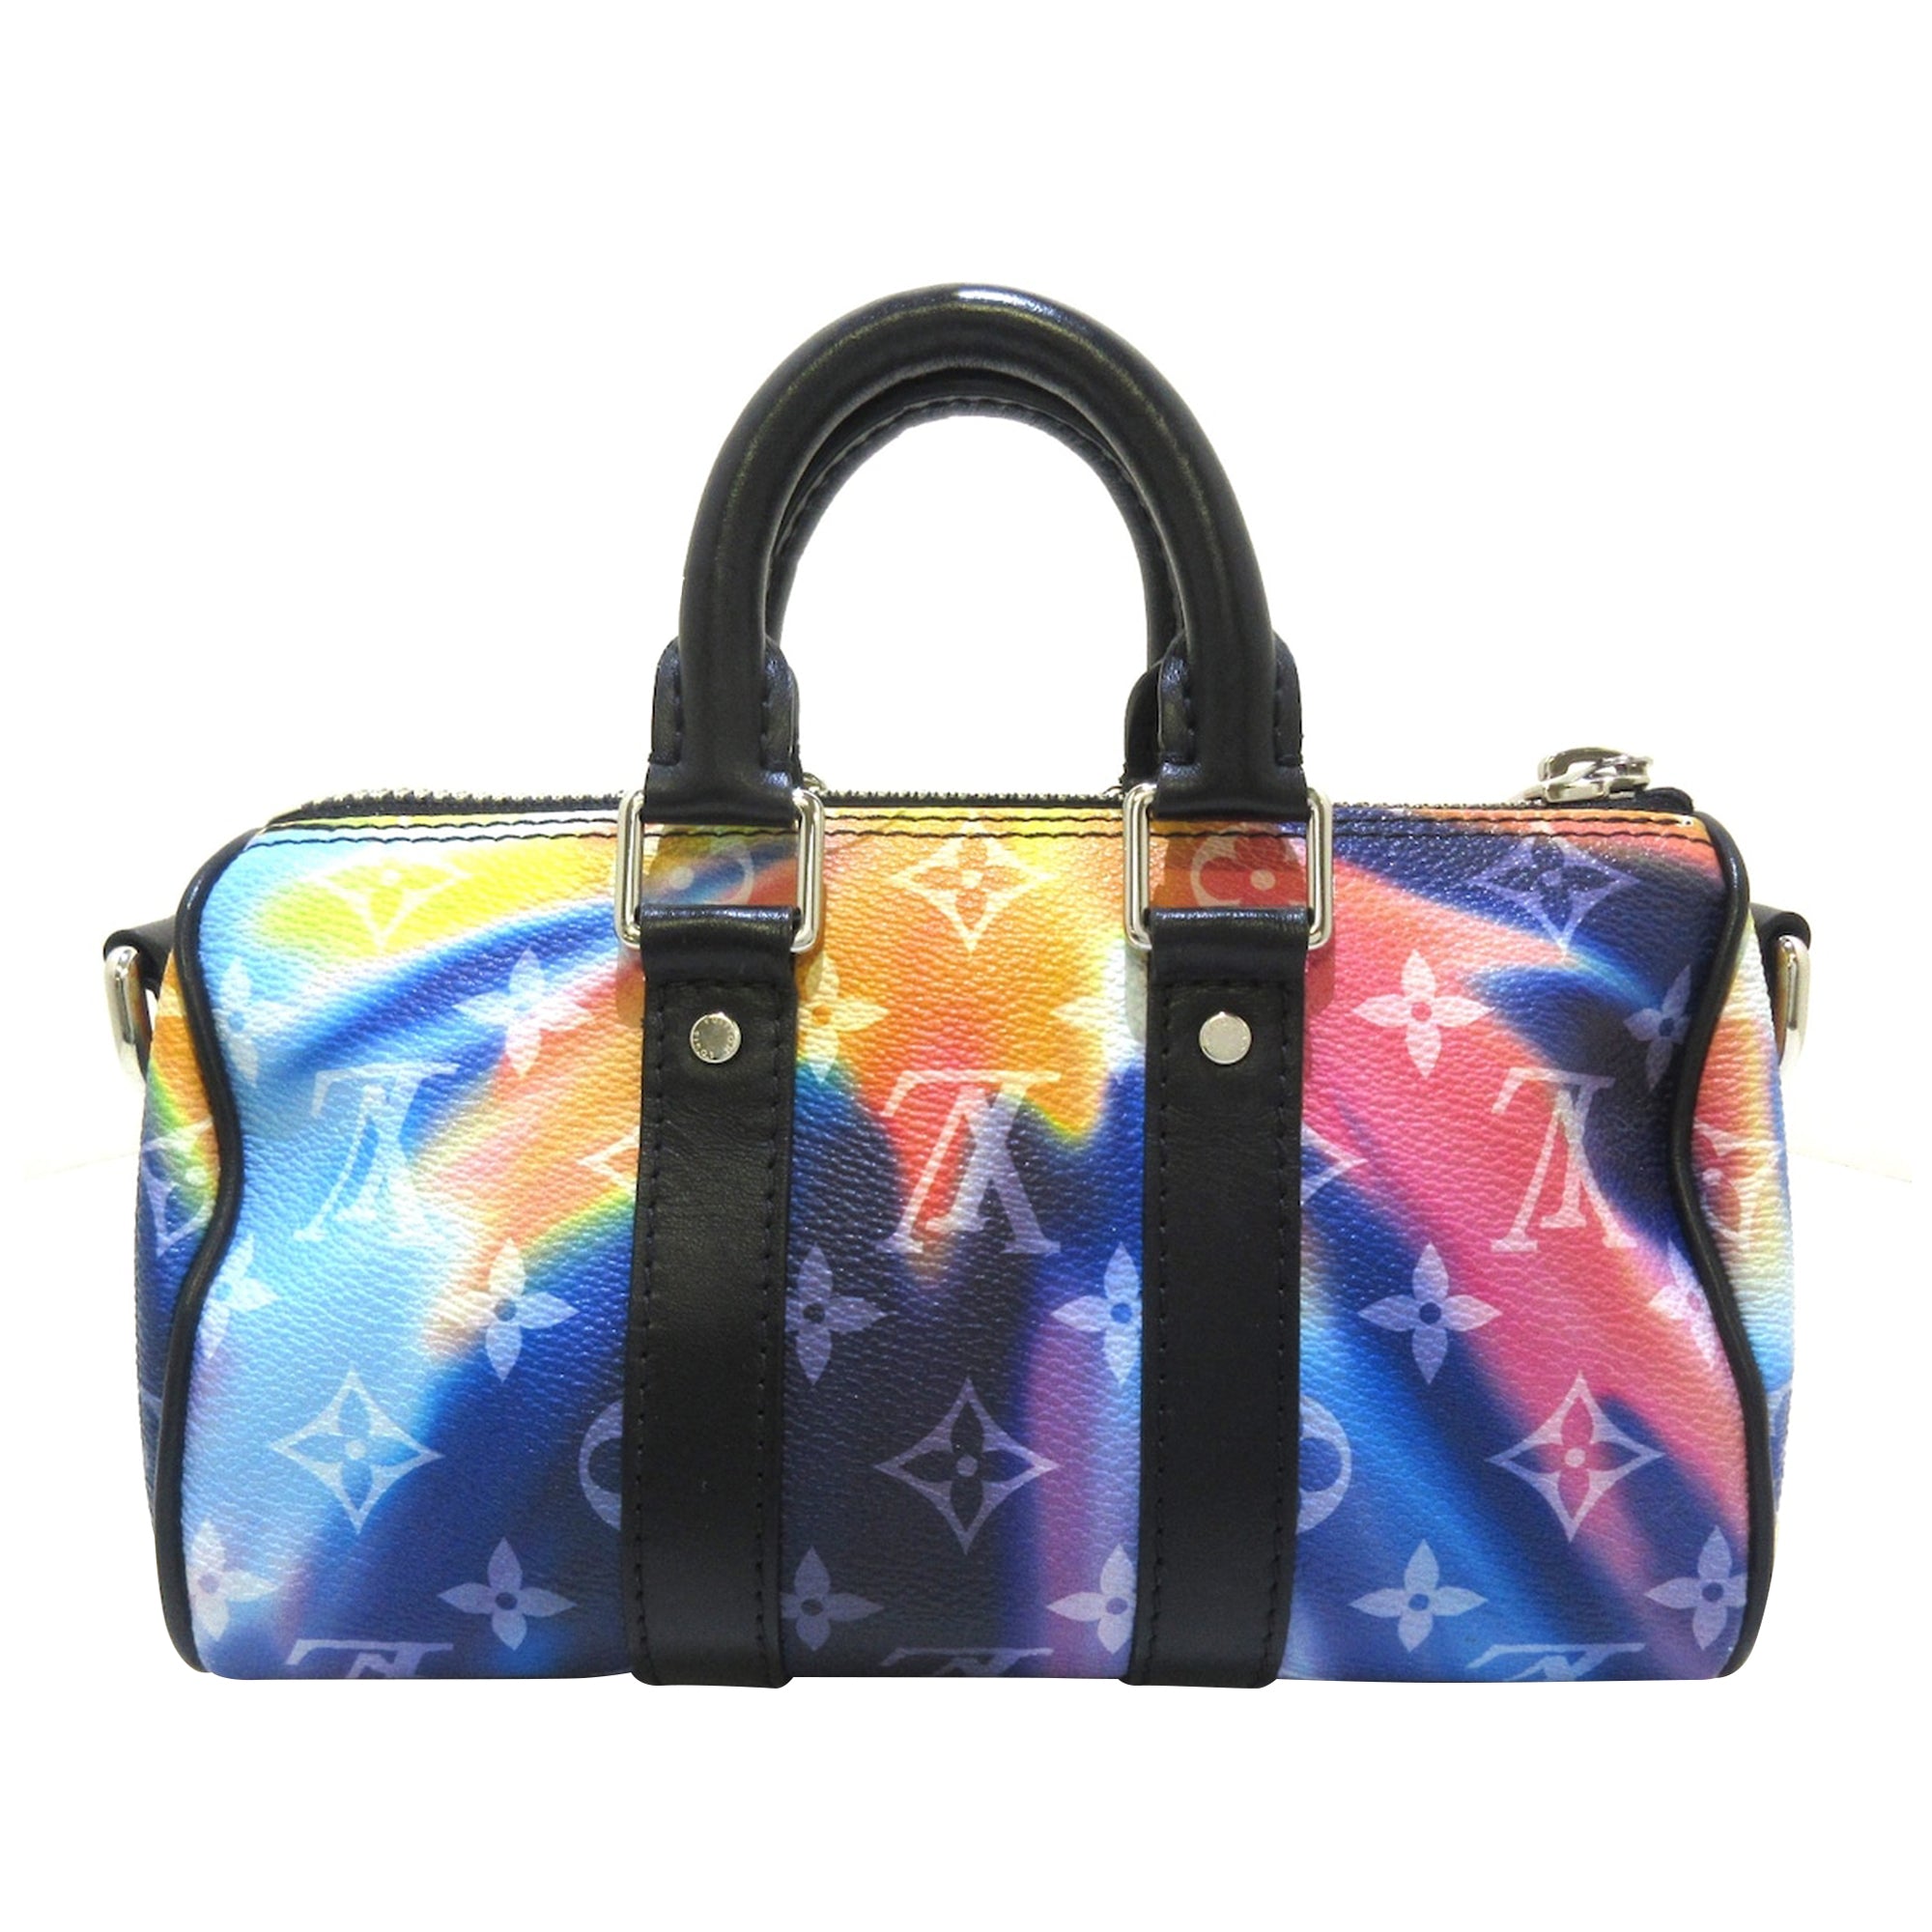 Louis Vuitton City Keepall Bag Leather with Limited Edition